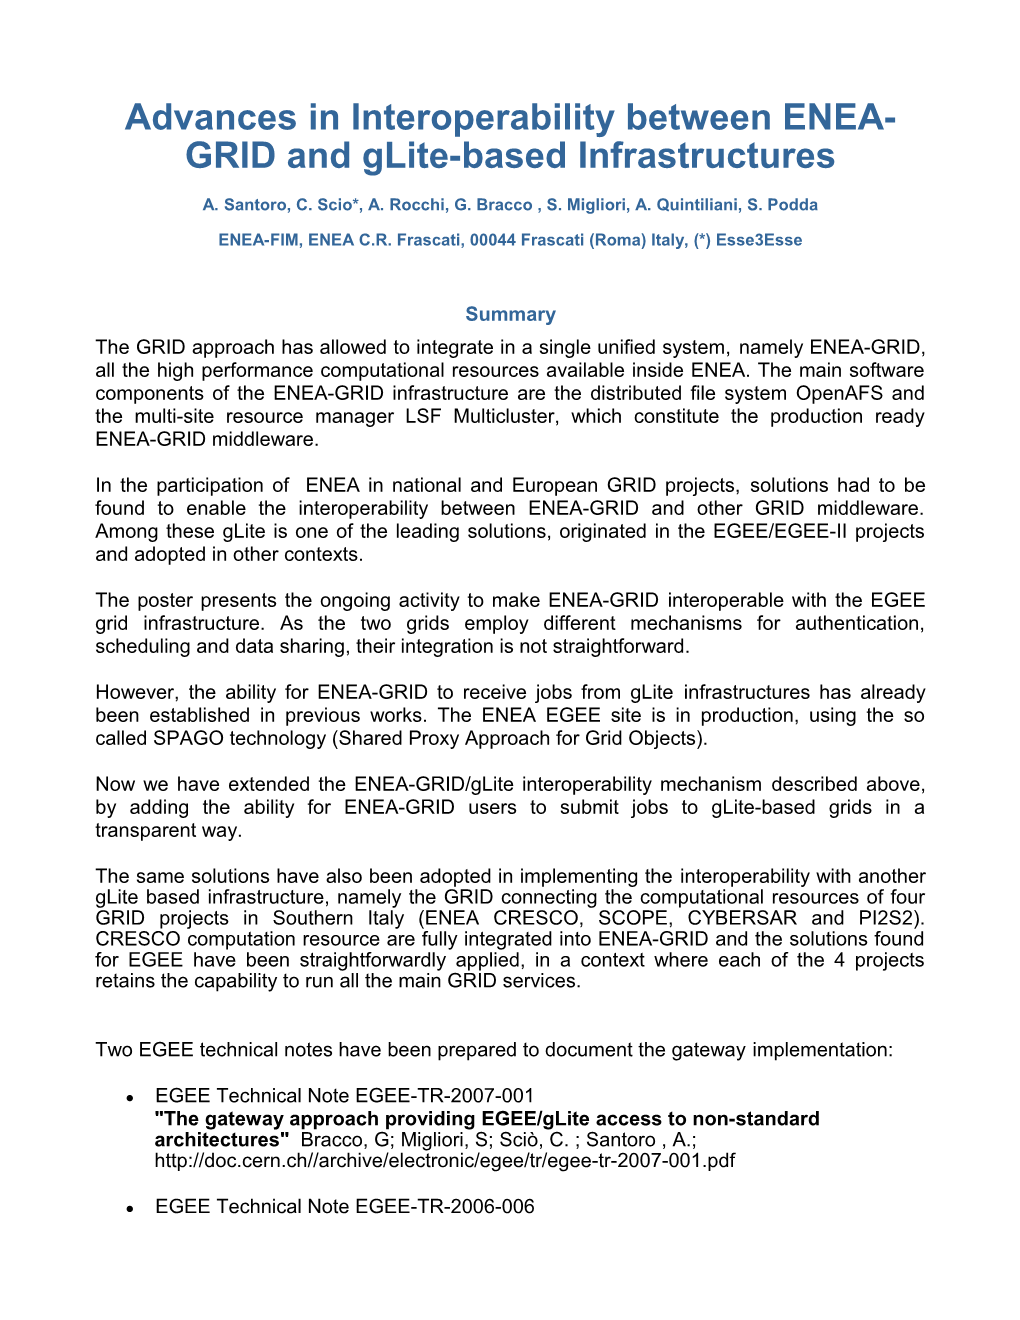 Advances in Interoperability Between ENEA-GRID and Glite-Based Infrastructures